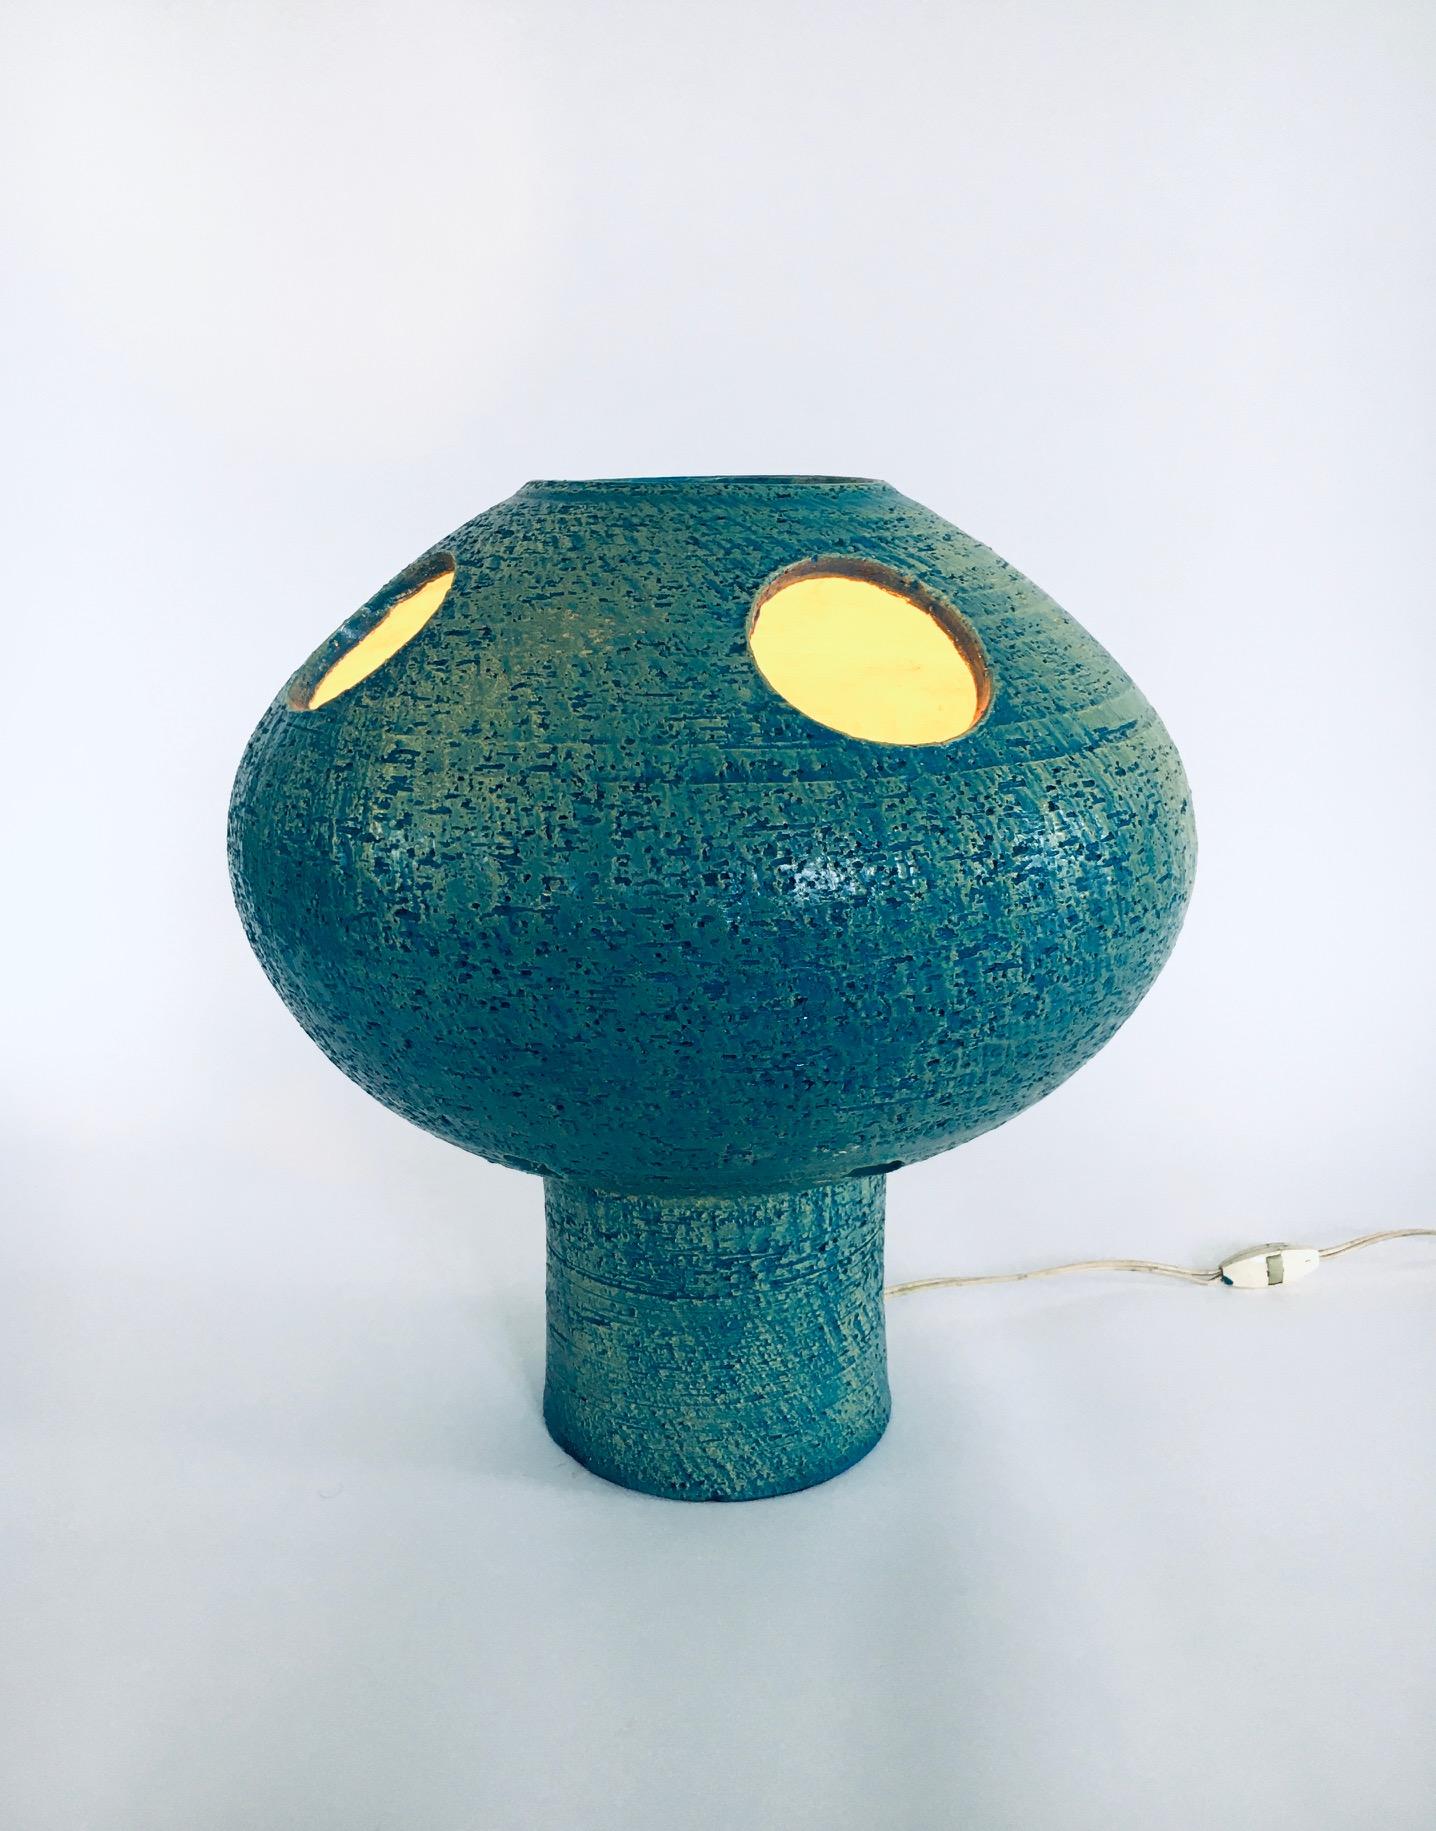 Vintage Brutalist Midcentury Dutch Design Art Studio Pottery Ceramic MUSHROOM Table Lamp. Made in the Netherlands, 1960's period. Large Table or Floor Lamp in turquoise / mint green glazes with yellow glaze on the inside. This mushroopm shape lamp